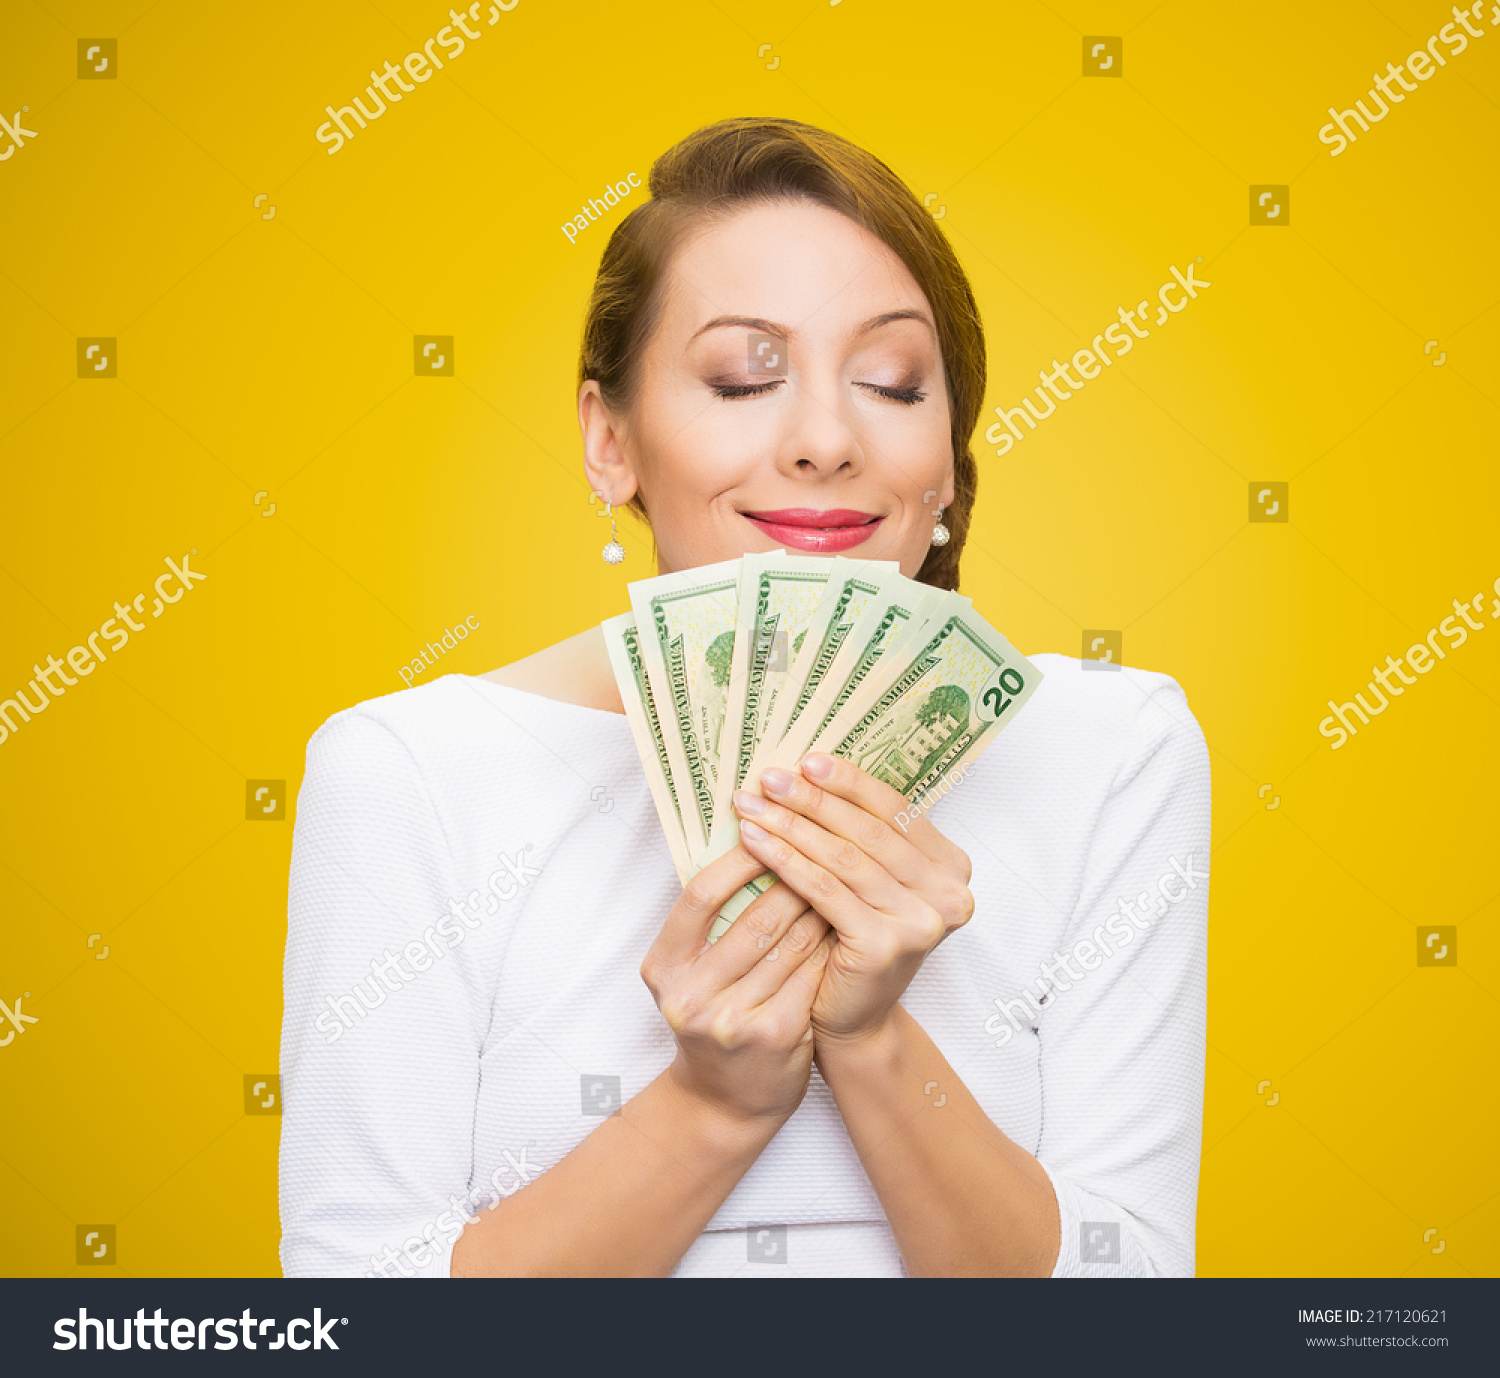 Hungry For Money Closeup Portrait Greedy Executive Ceo Boss Corporate Employee Holding